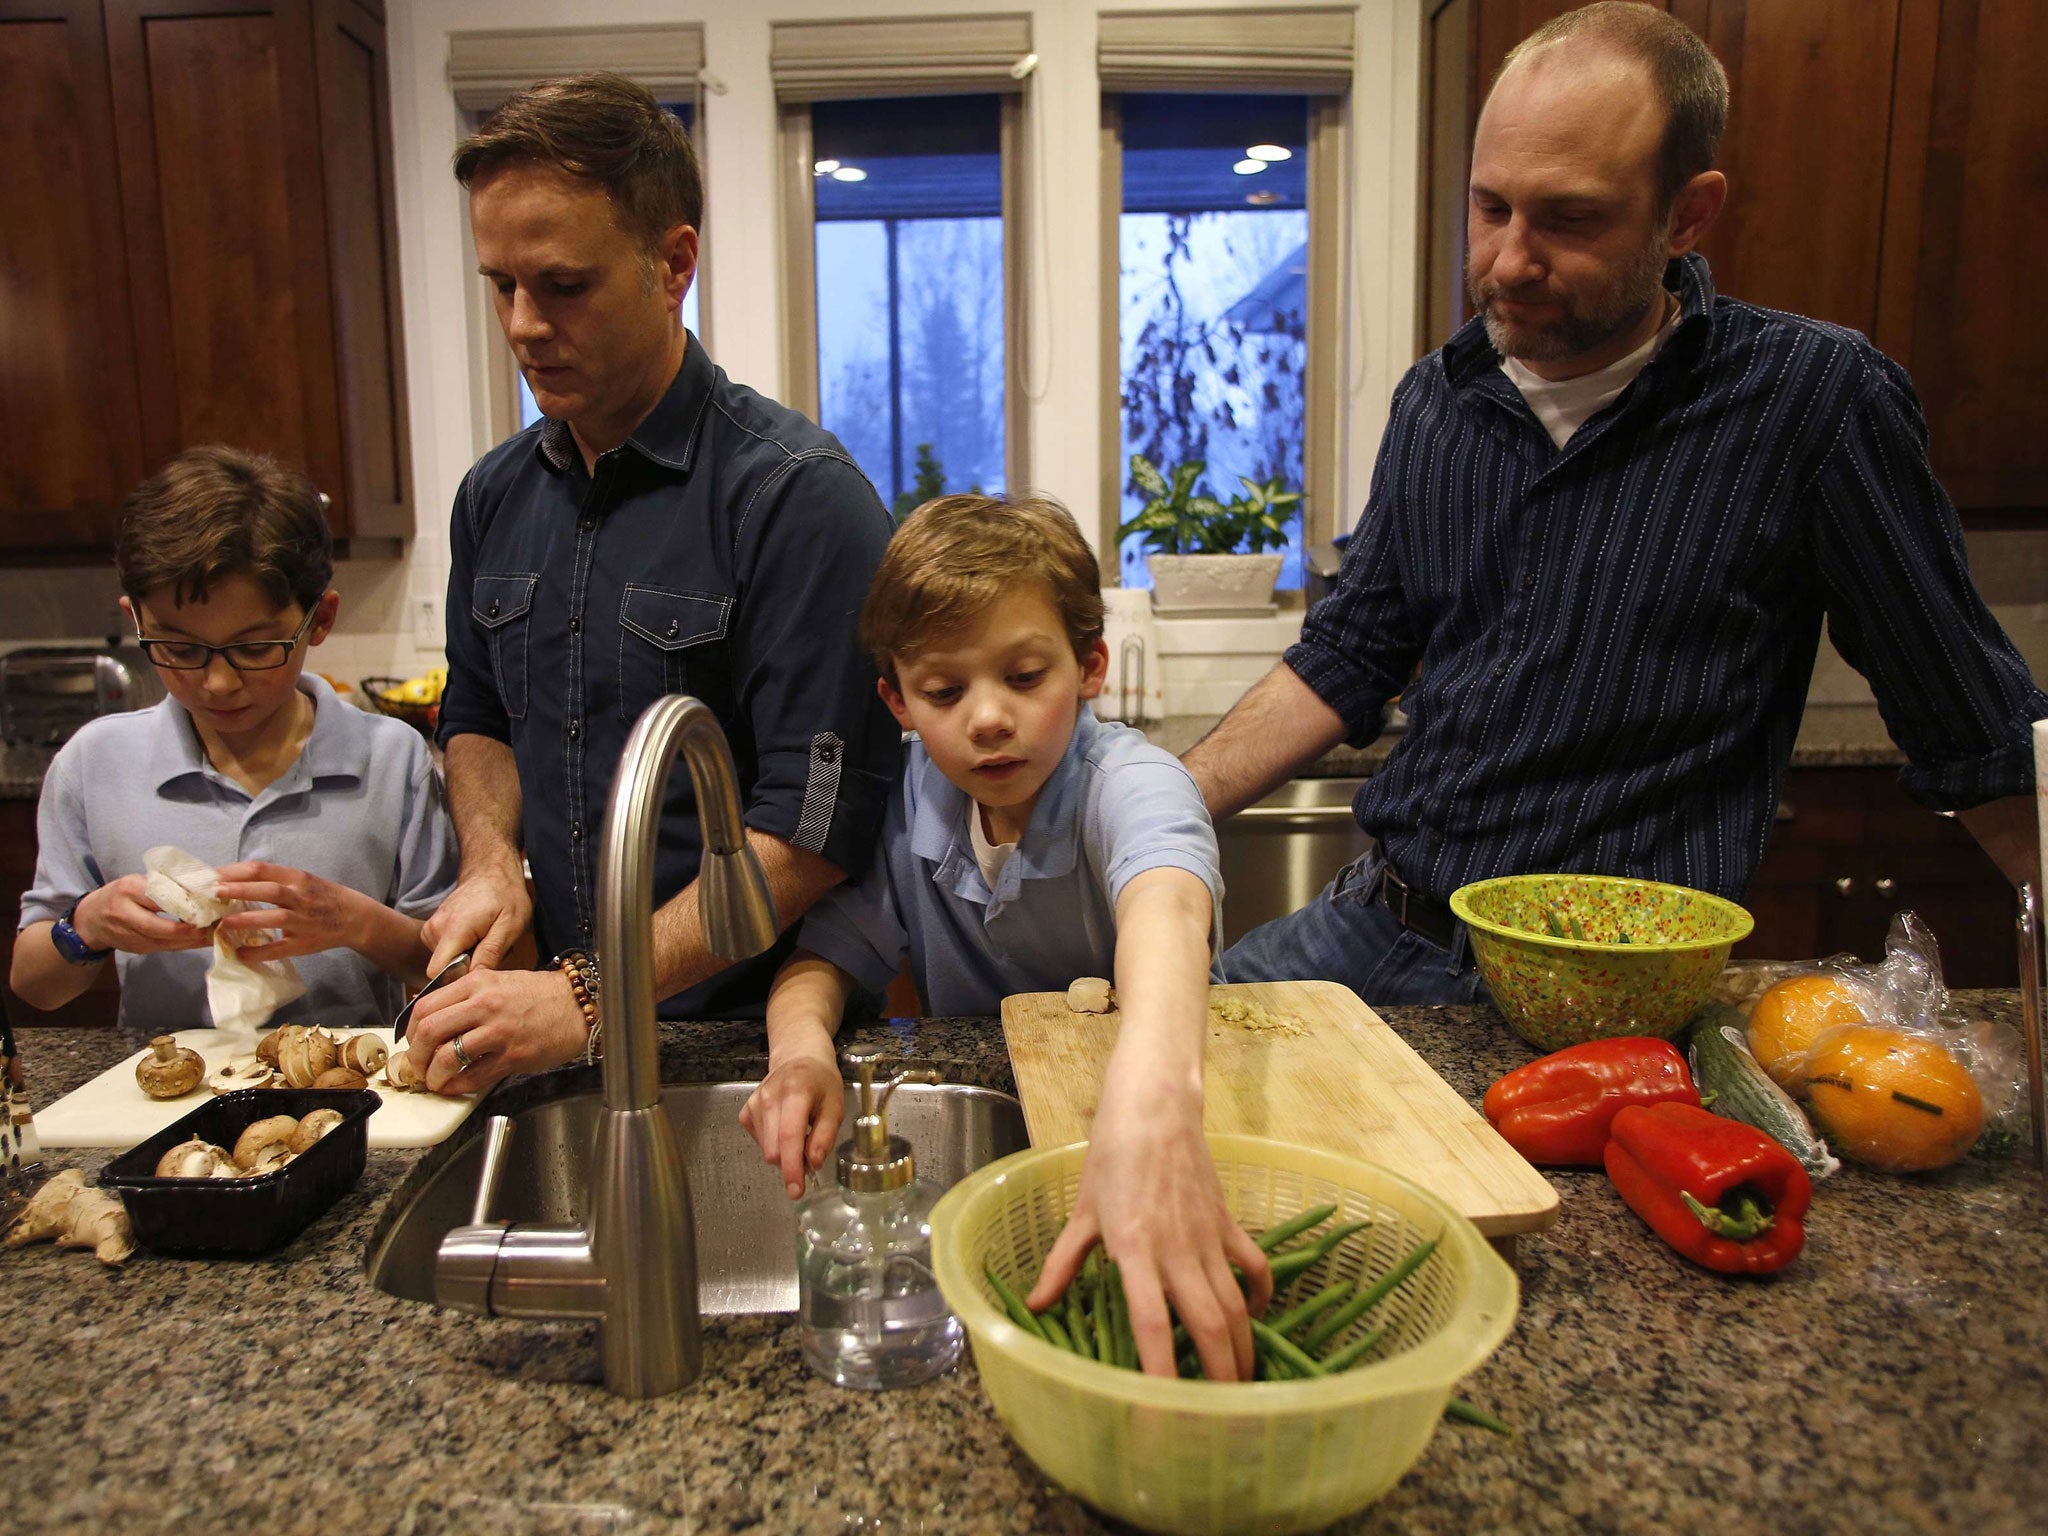 Paul Redd-Butterfield, second left, and his husband Tony Butterfield cook dinner with their adopted 11 year-old twin sons Lucas, left, and Liam at their home in Sandy, Utah. Paul and Tony were legally married in 2013. The US Government said it will recogn